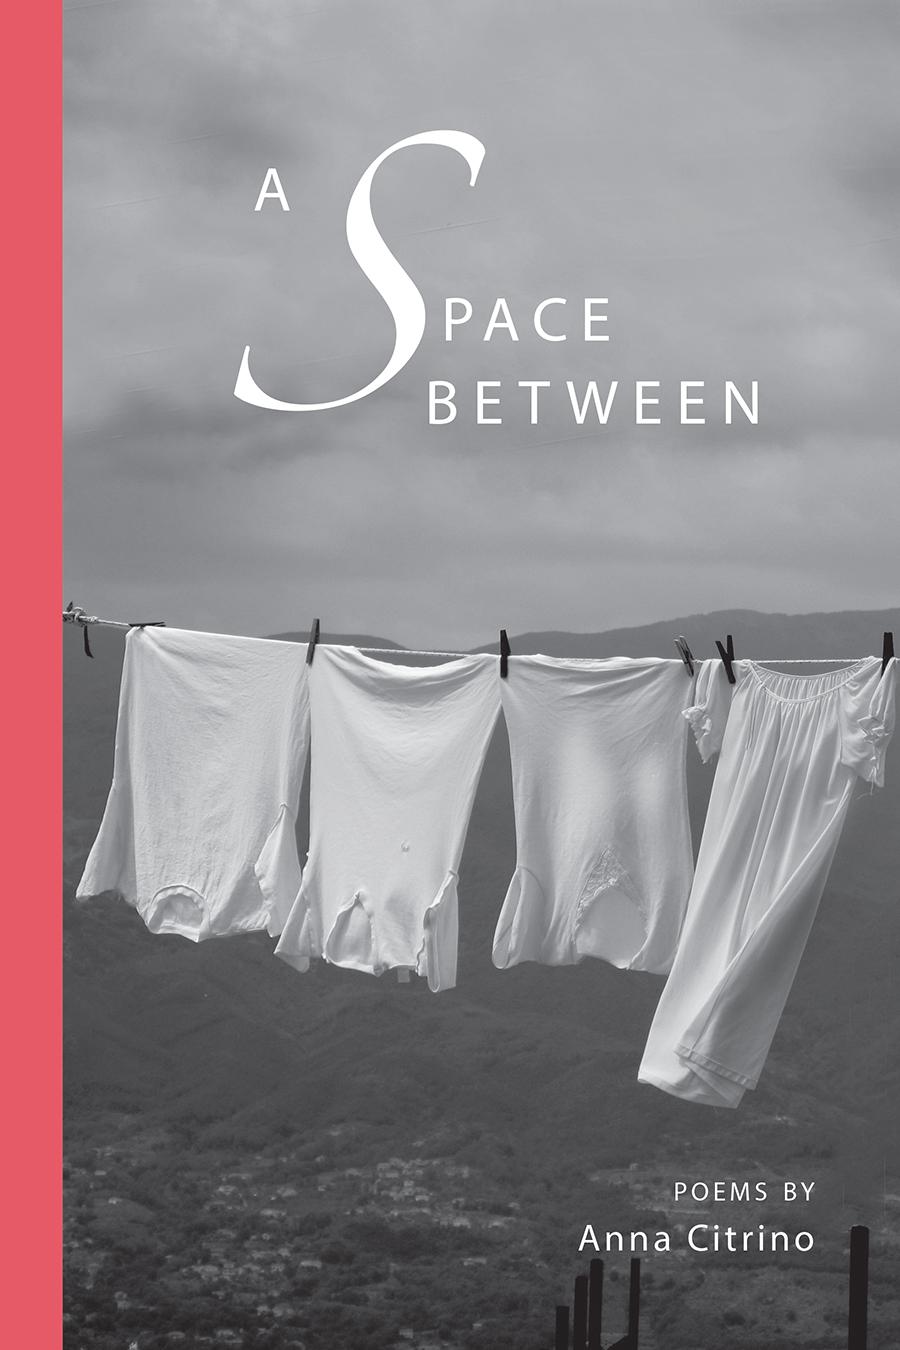 Cover of "A Space Between" by Anna CItrino: black-and-white photo of white clothing on a clothesline against a backdrop of cloudy sky and mountains.